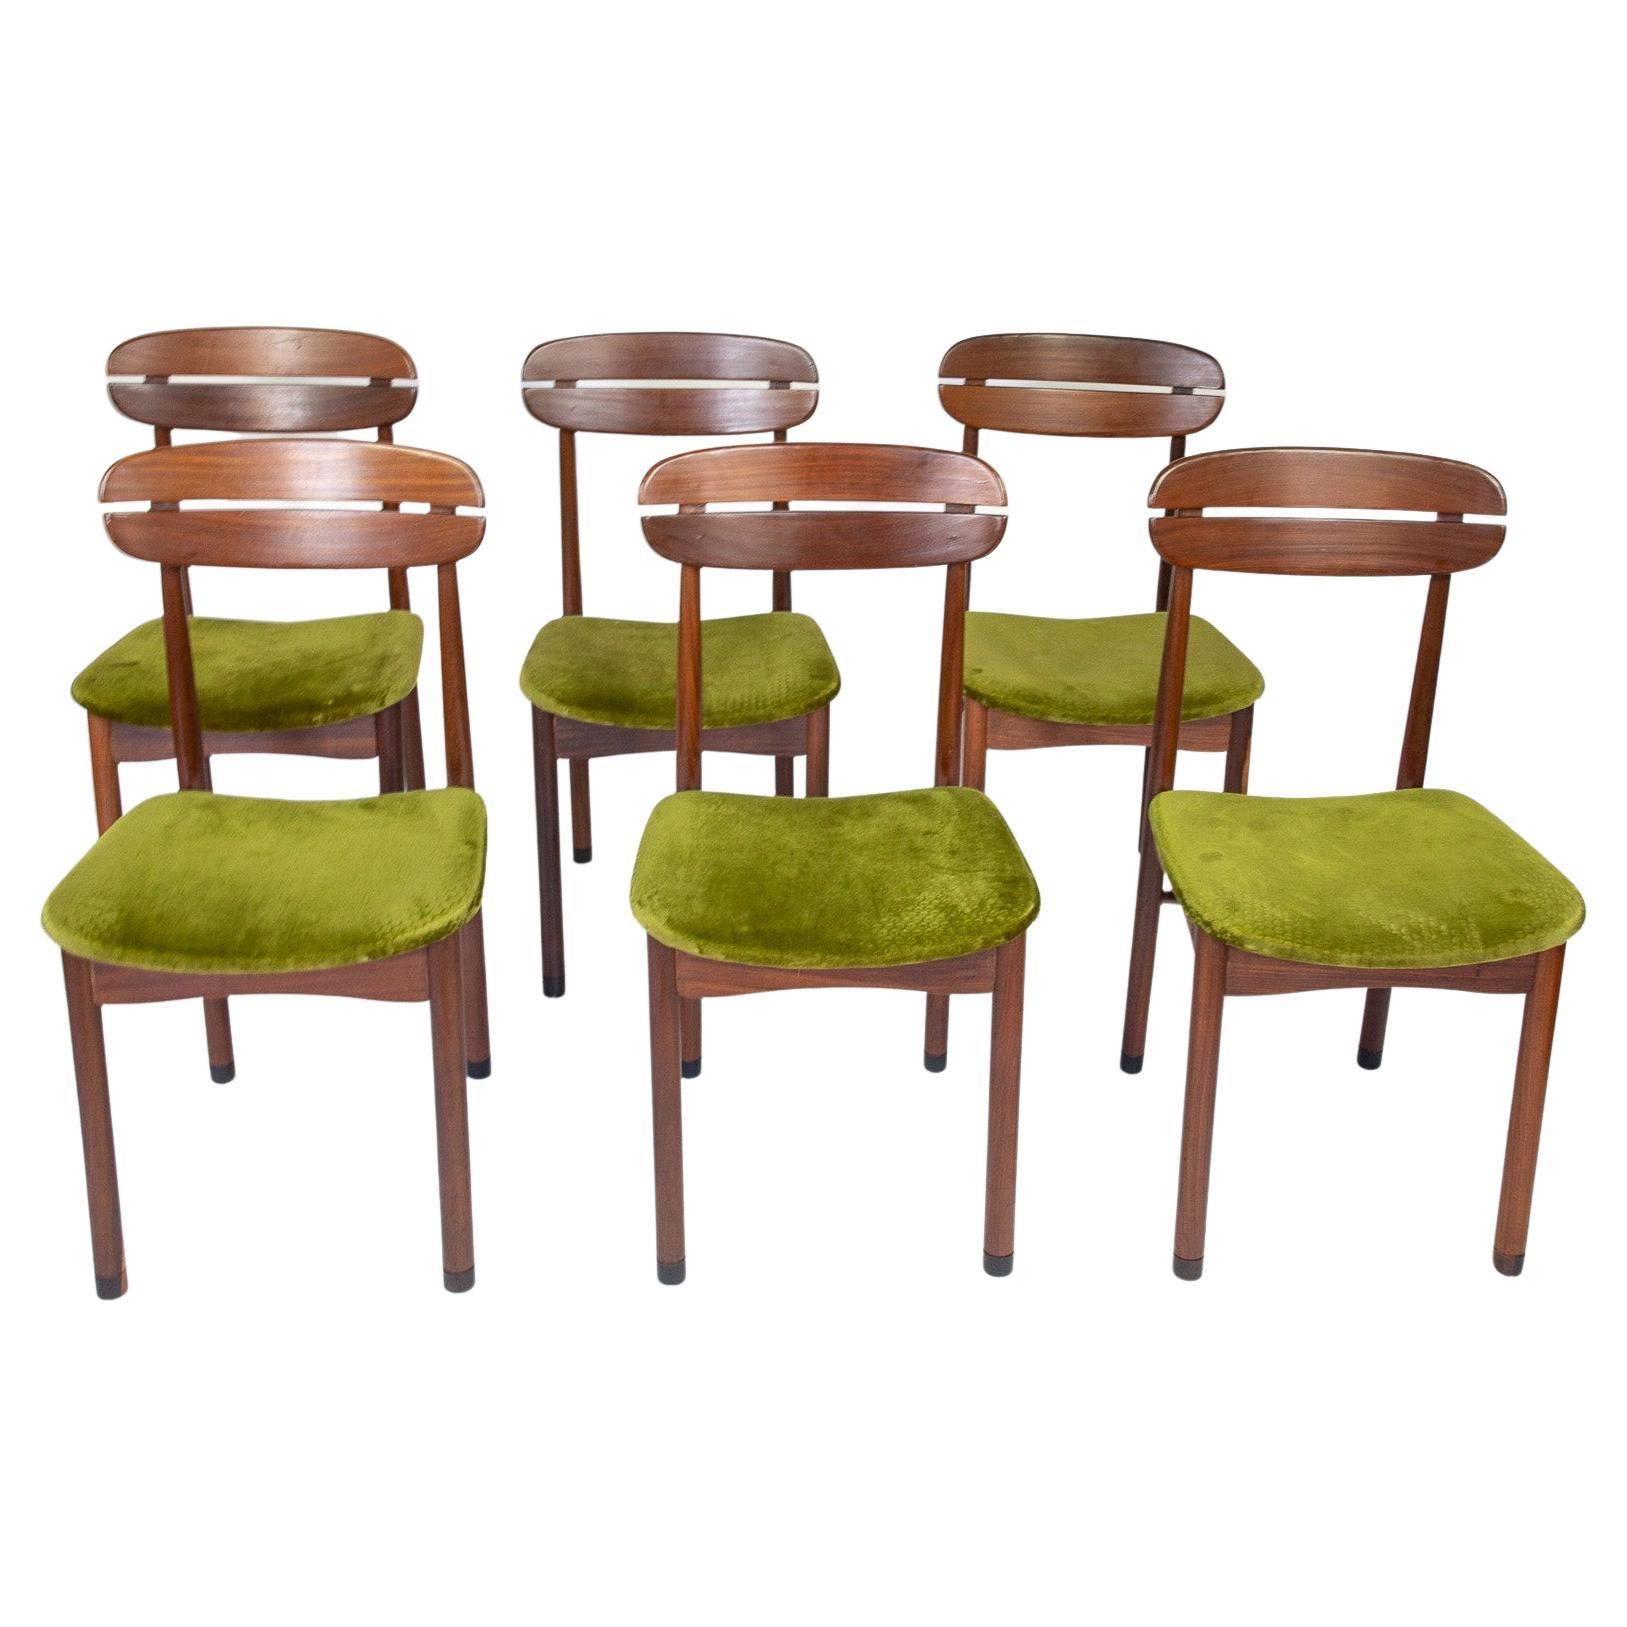 Mid-Century Modern Dining Chairs with Green Velvet Upholstery 'Set of 6', 1950s